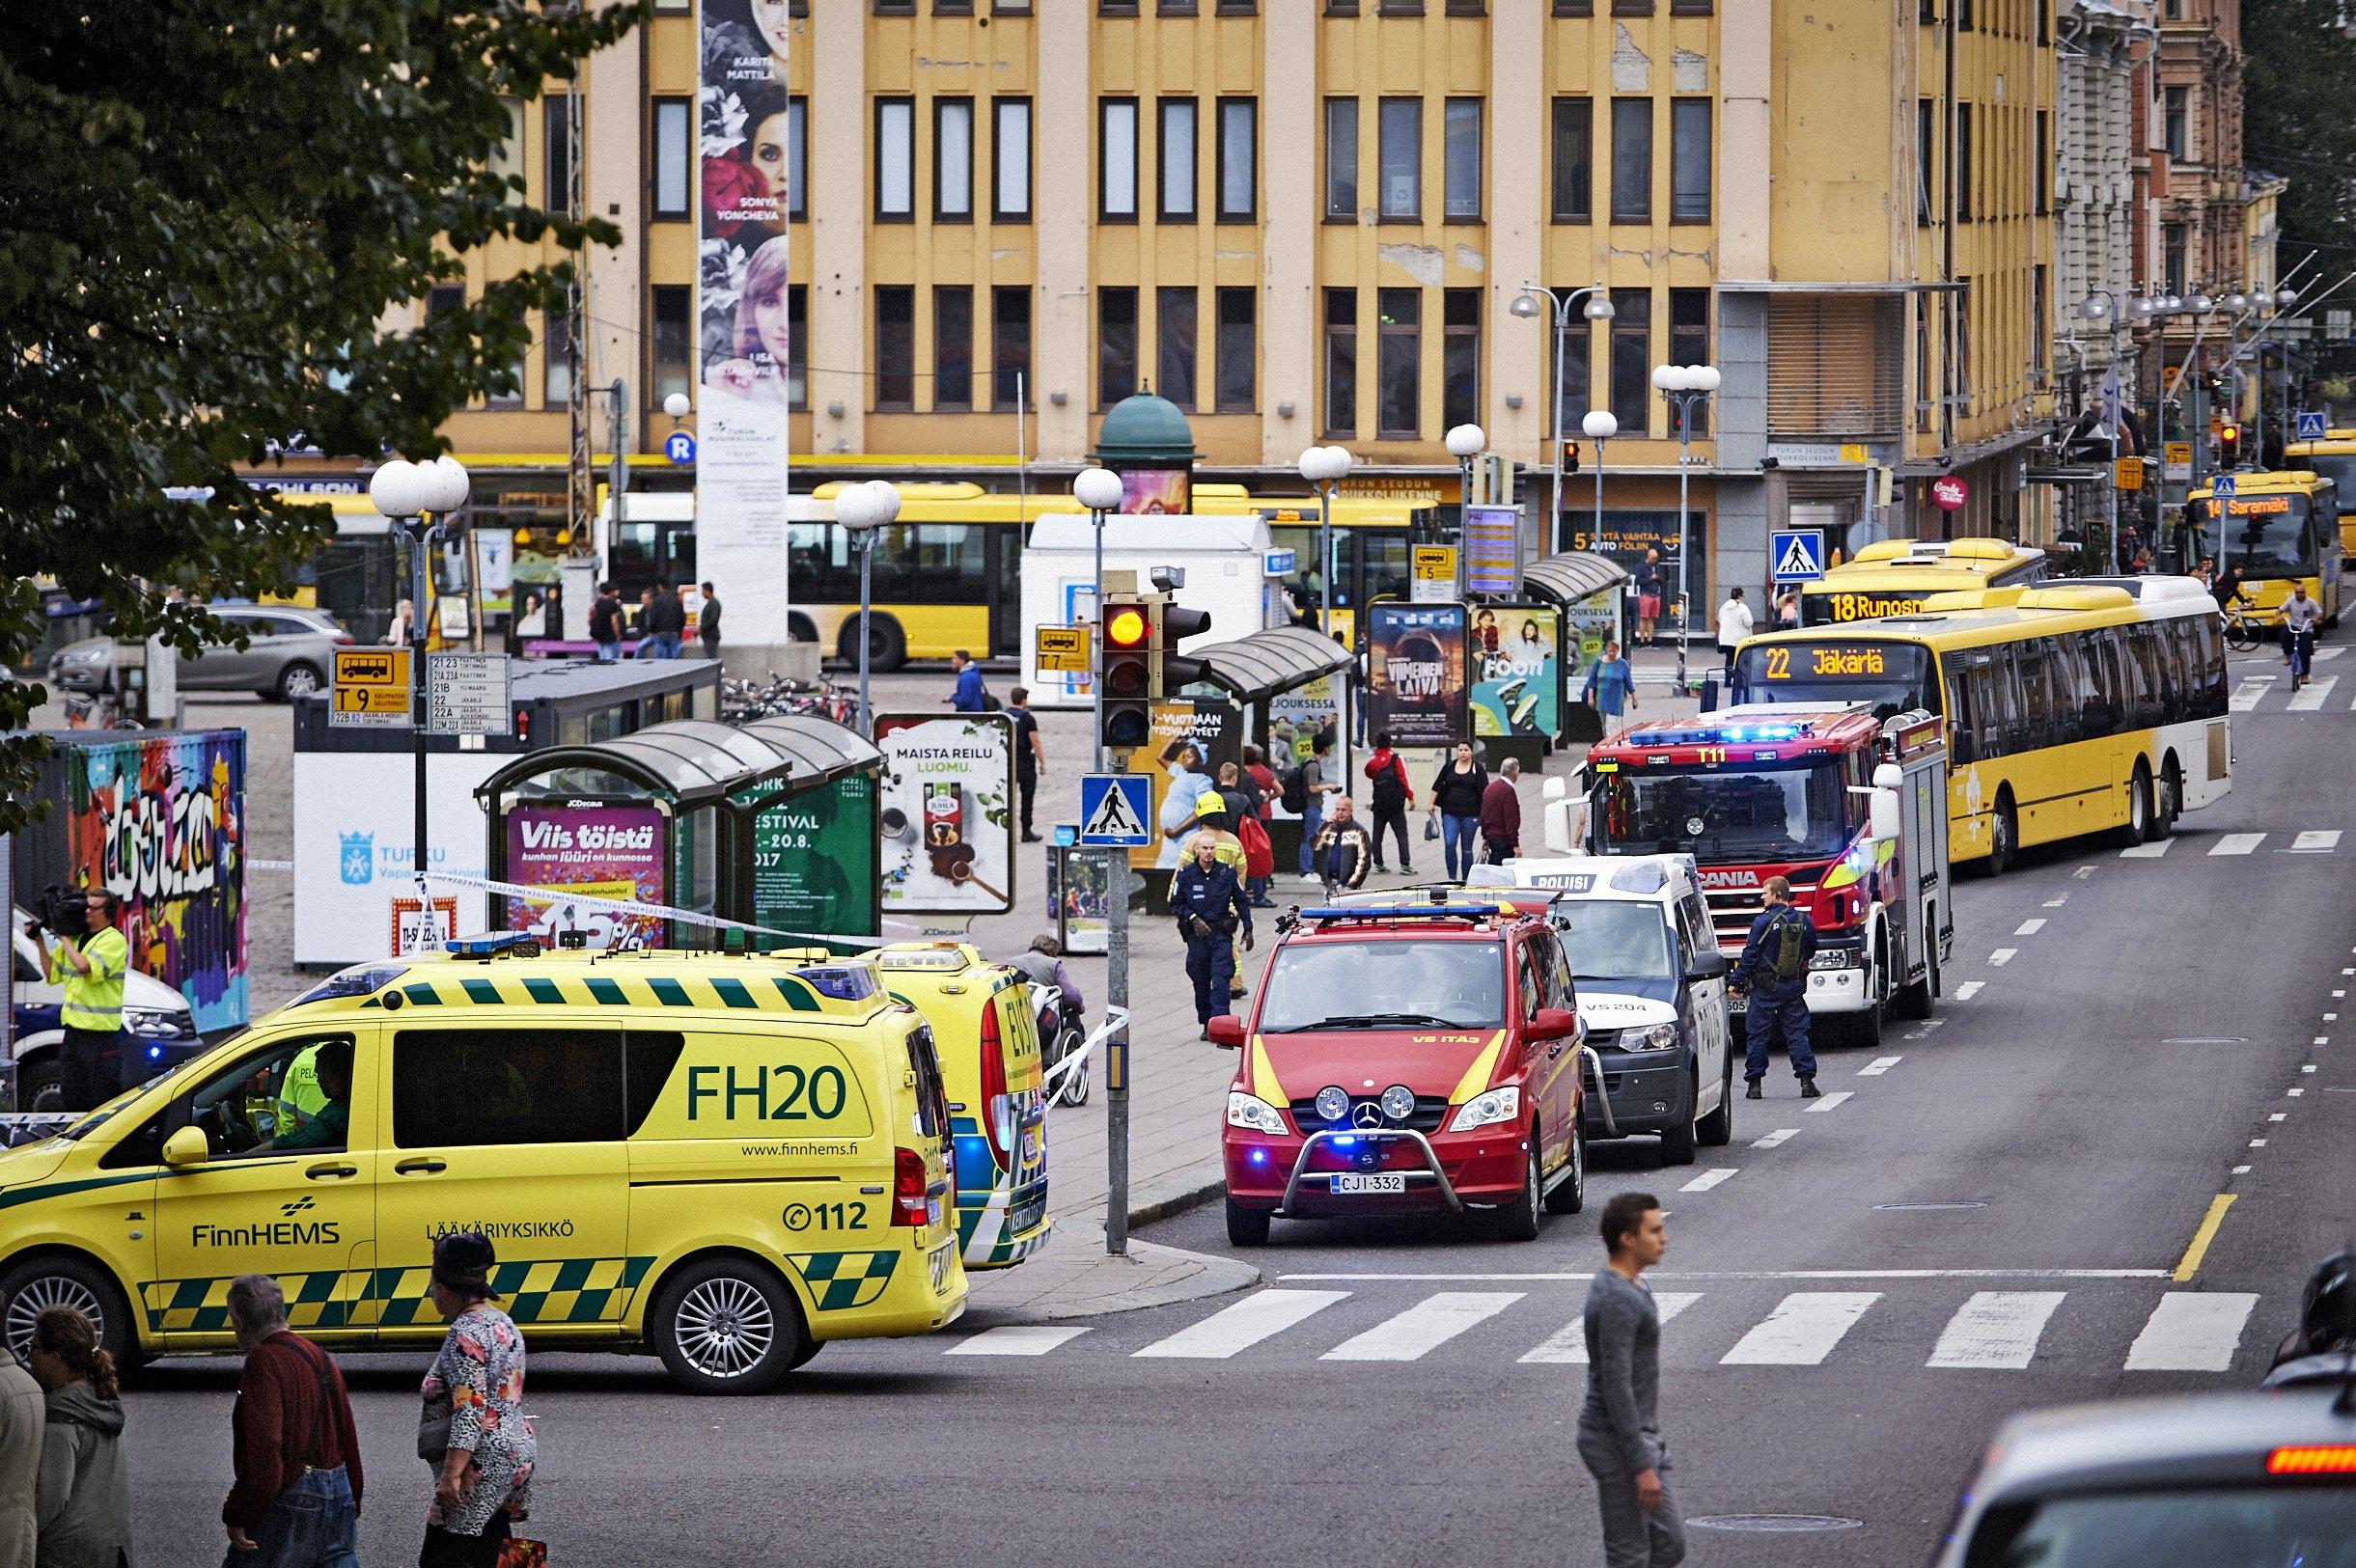 Emergency services gathered following multiple stabbings in Turku's market square